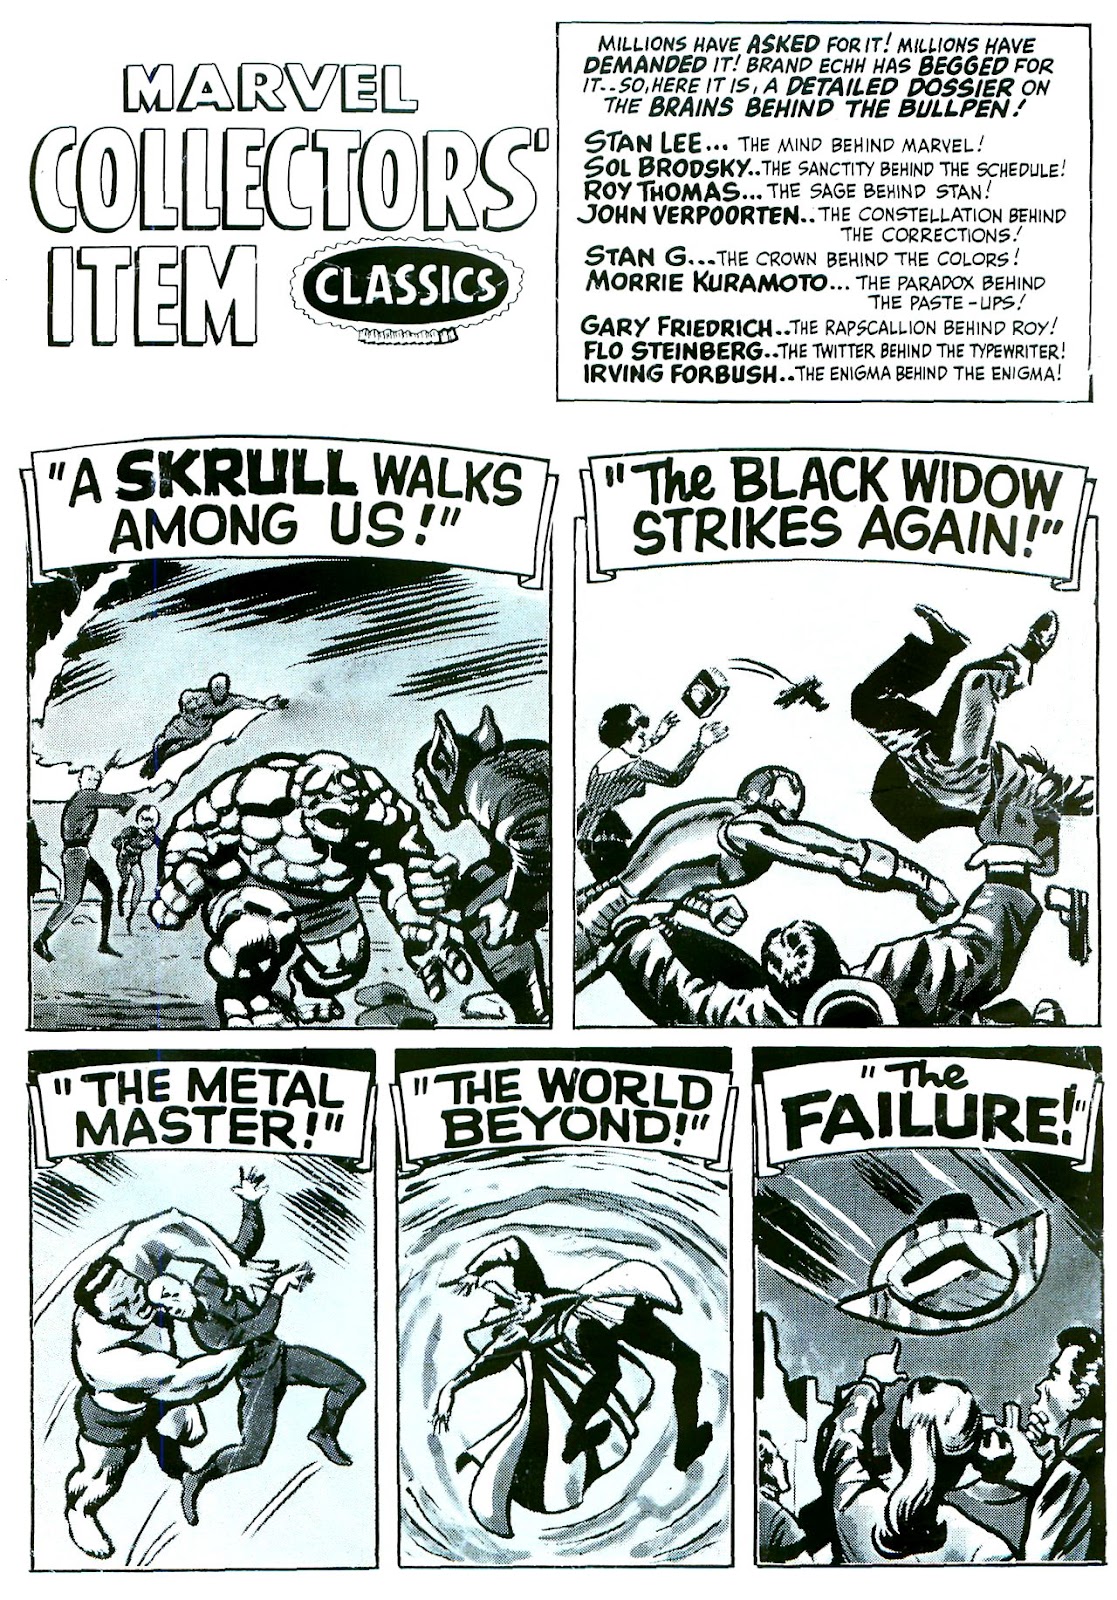 Marvel Collectors' Item Classics issue 13 - Page 3